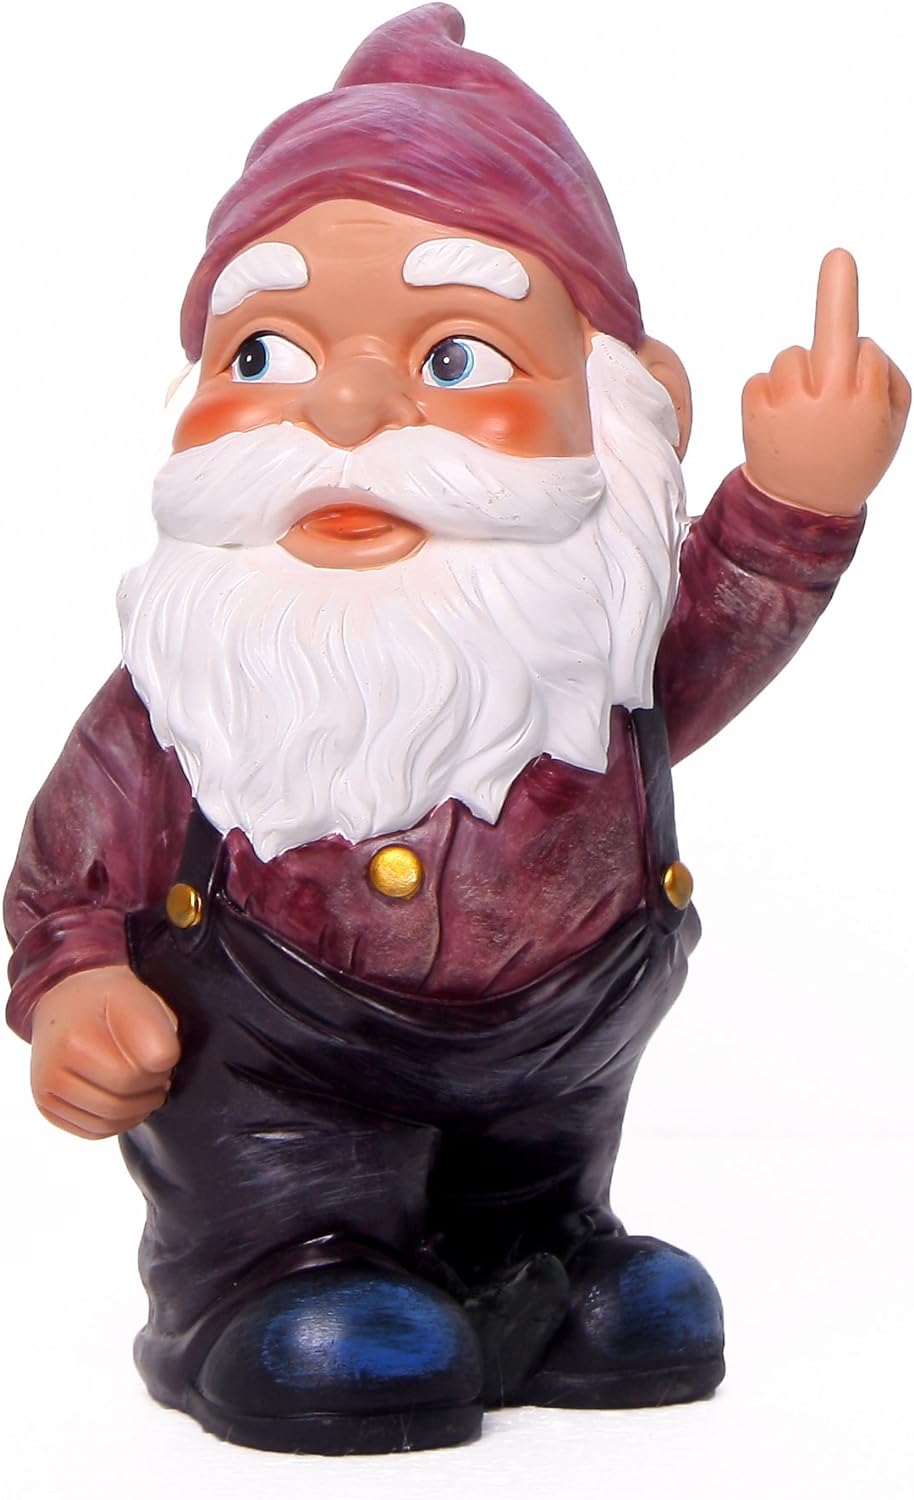 Garden Gnome Statue - Middle Finger Gnome - Indoor/Outdoor Garden Gnome Sculpture for Patio, Yard or Lawn